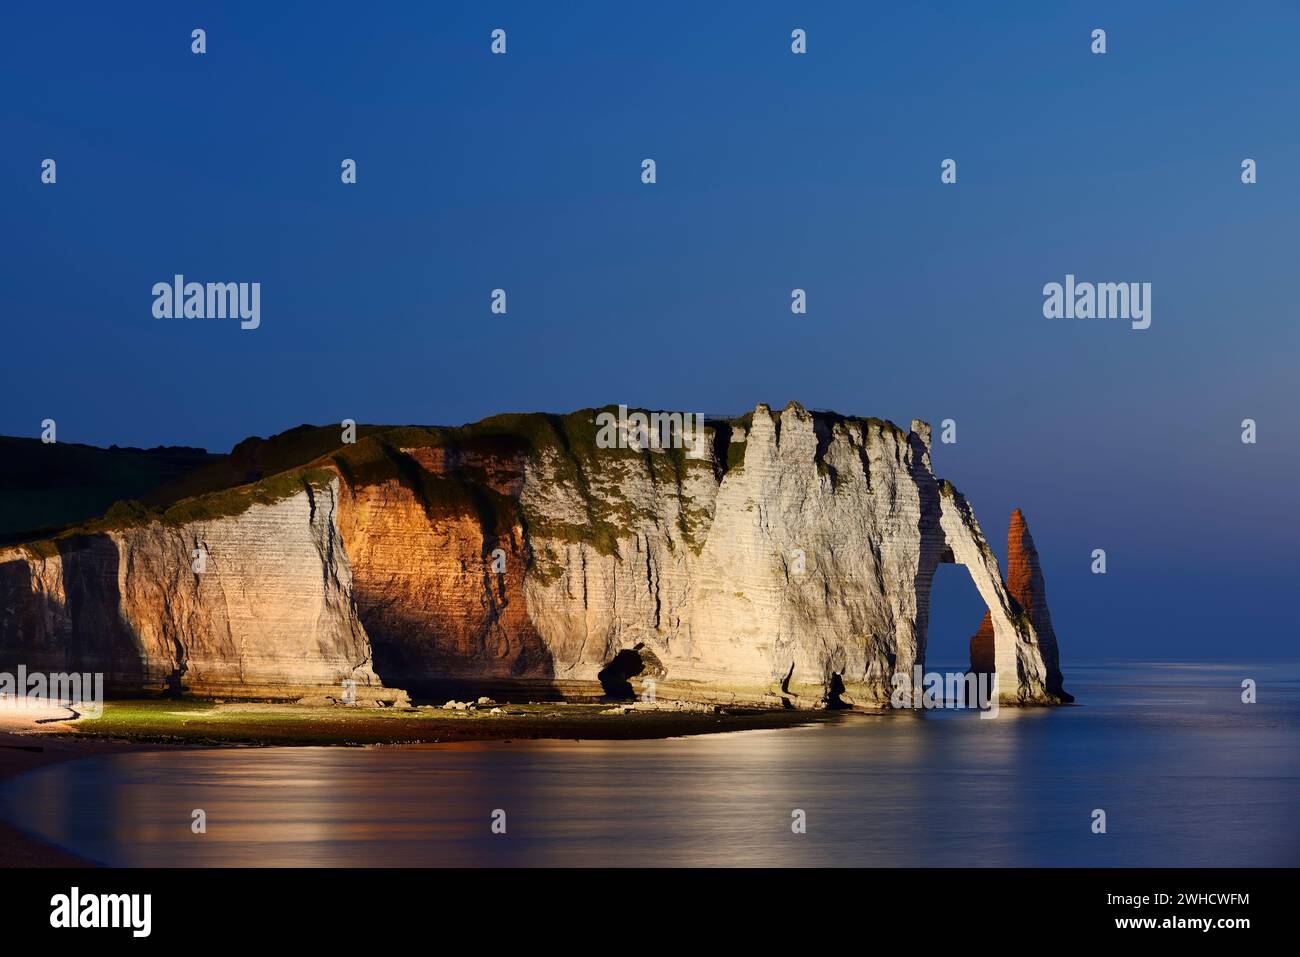 Steep cliffs with the Falaise d'Aval rock gate and the Aiguille díEtretat rock needle at night, Etretat, Alabaster Coast, Seine-Maritime, Normandy, France Stock Photo